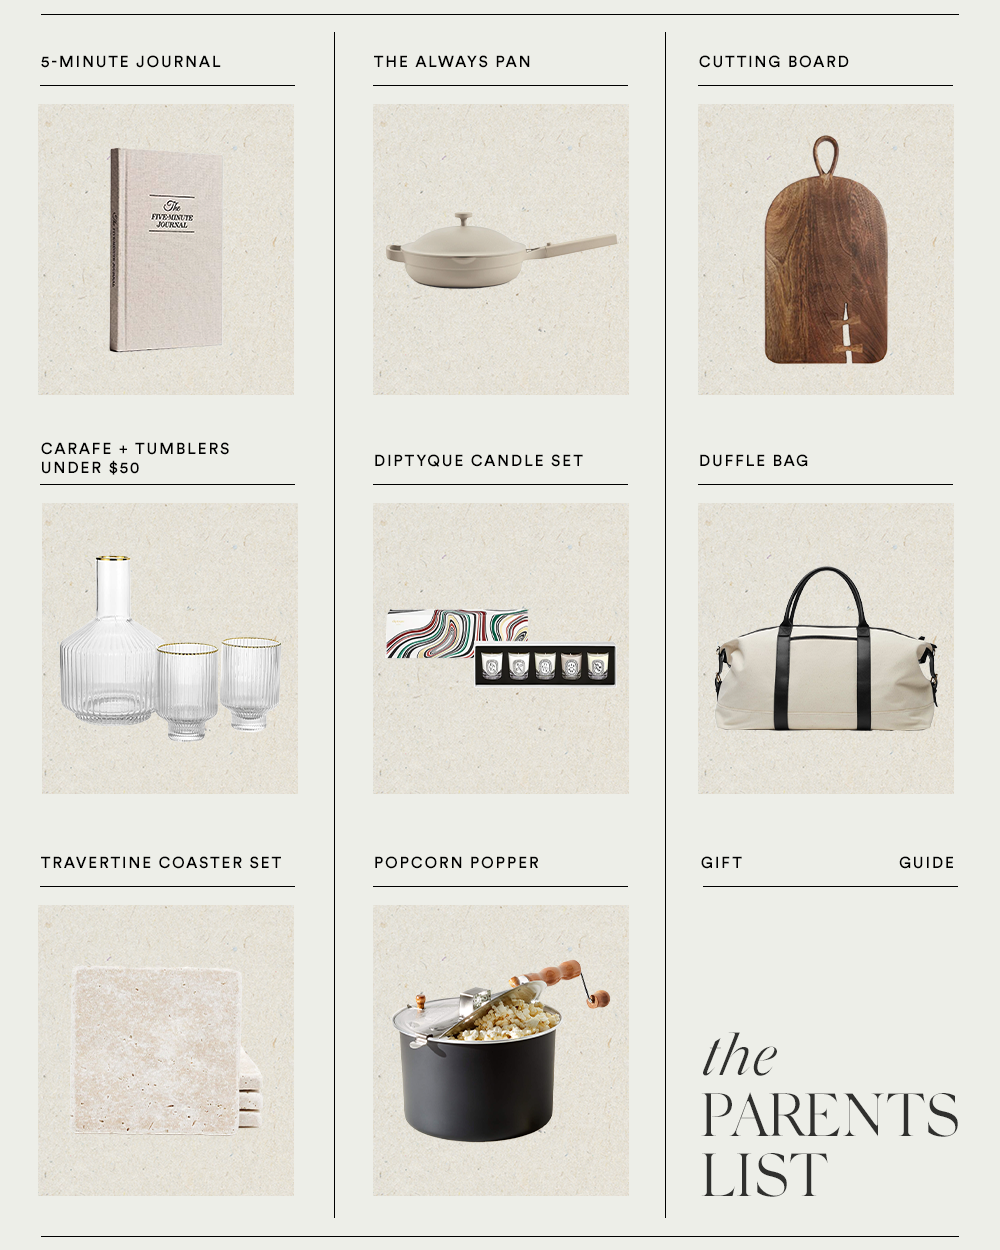 GIFT GUIDE: The Parents List